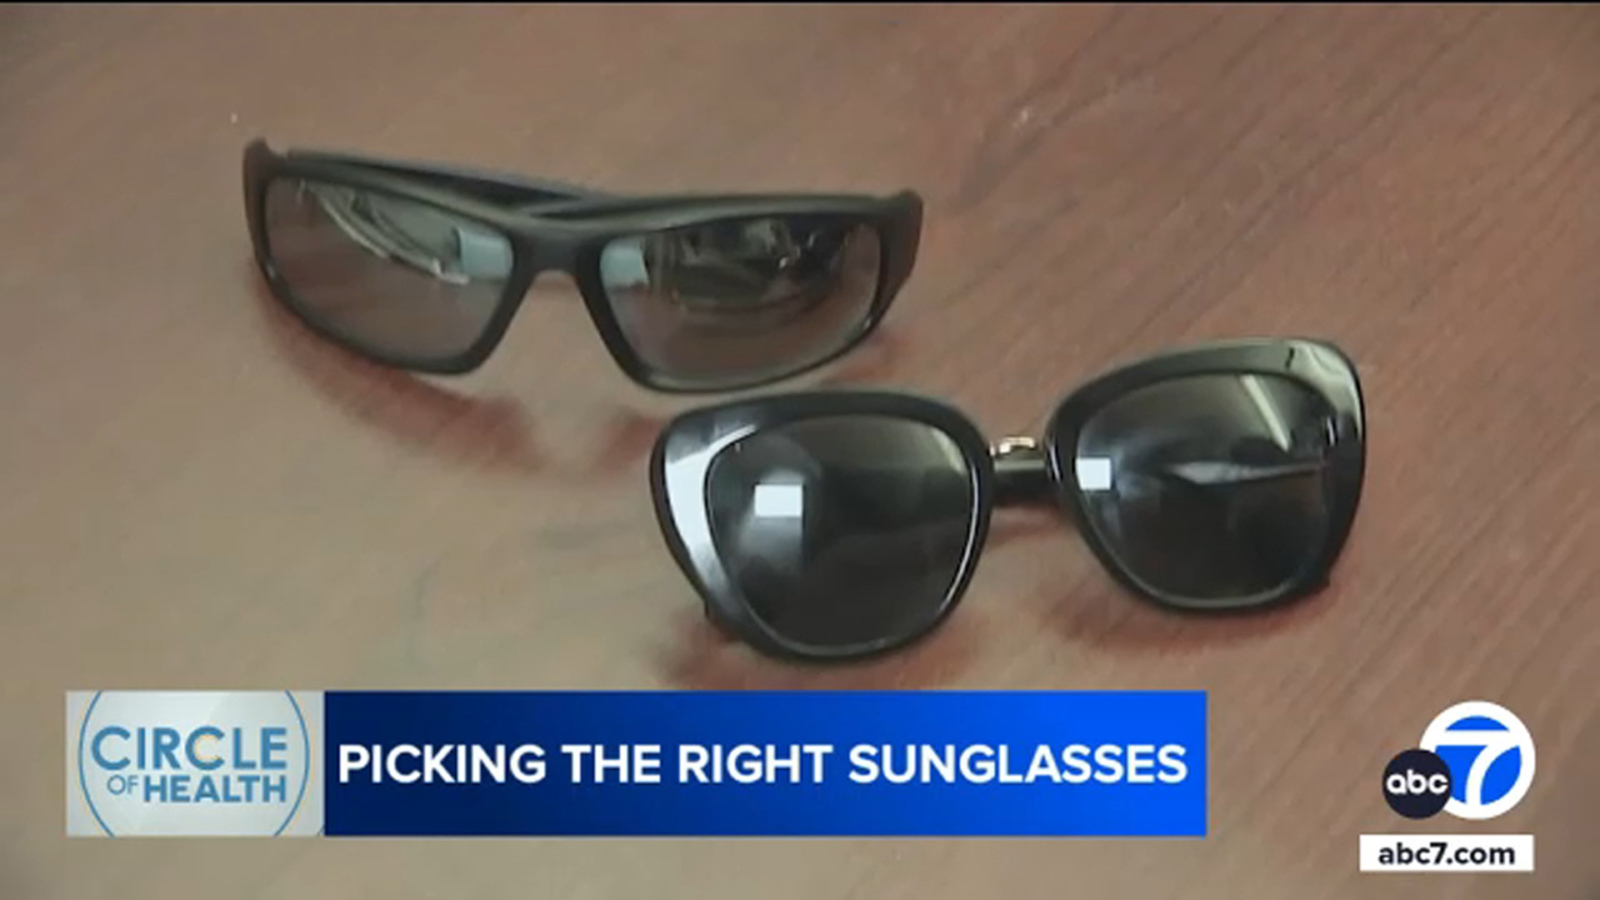 Buying sunglasses: How to choose the best pair that protect your eyes [Video]